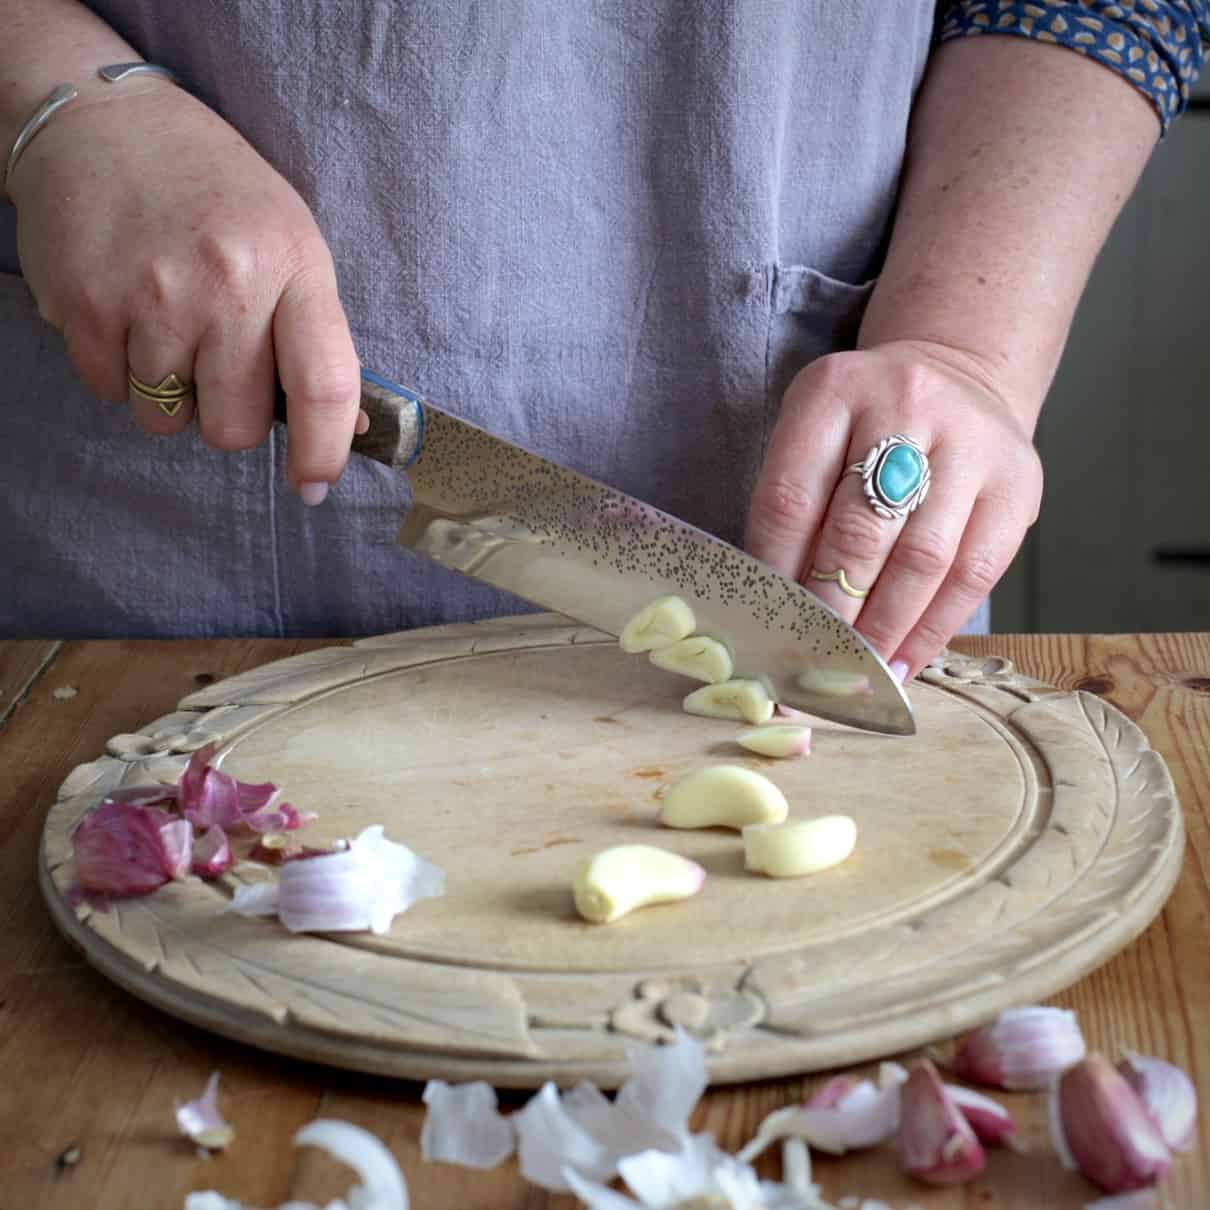 Woman in grey slicing garlic cloves on a old fashioned wooden chopping board